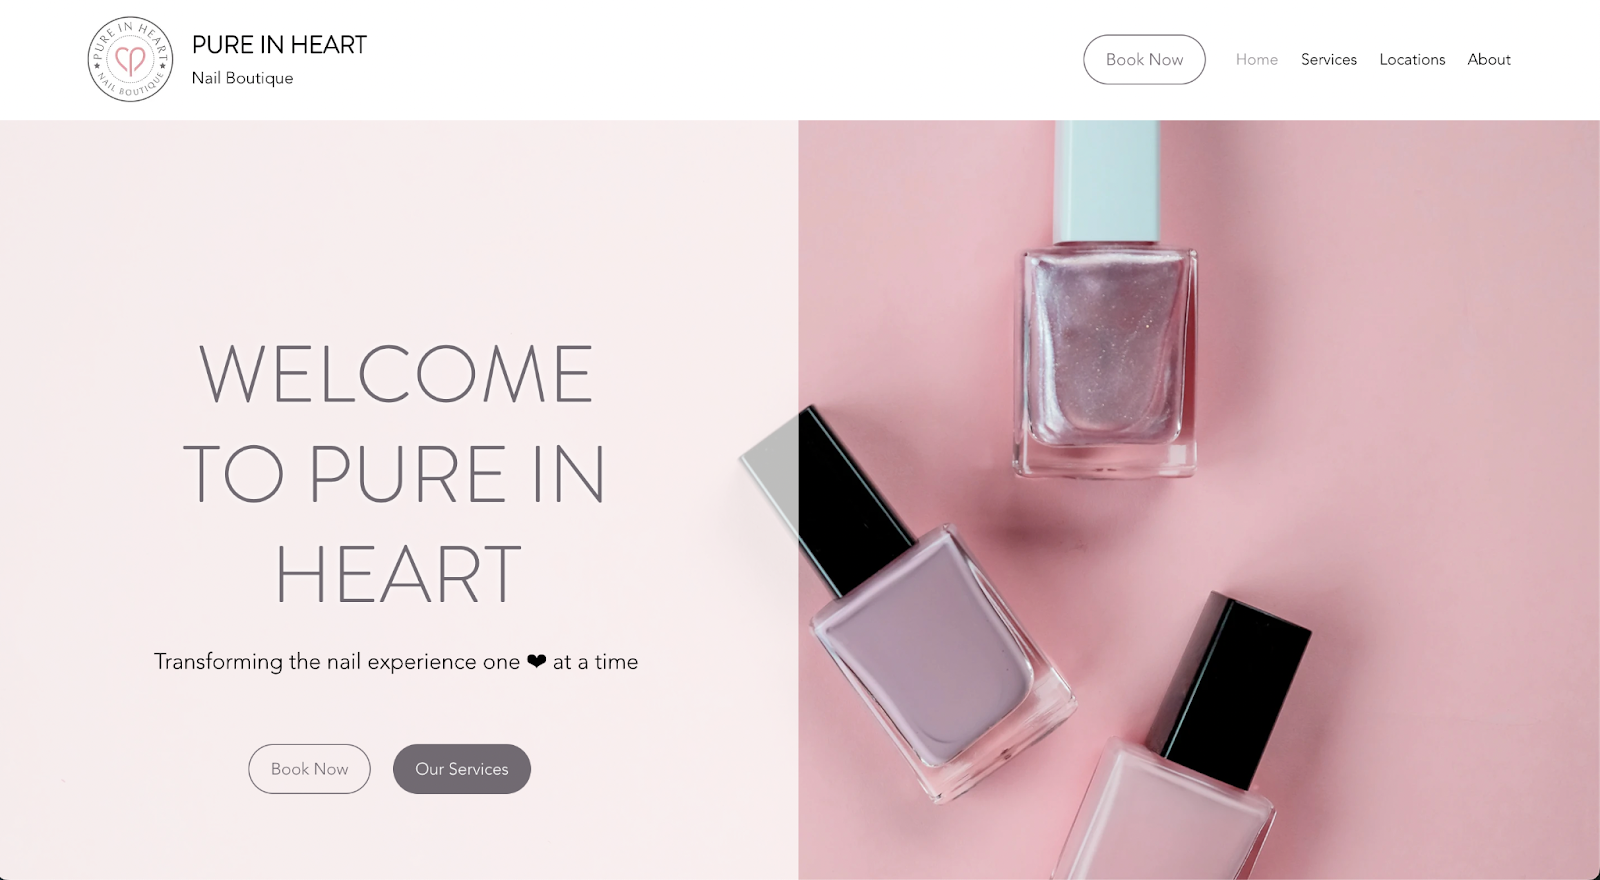 Best nail salon websites, example from Pure in Heart.